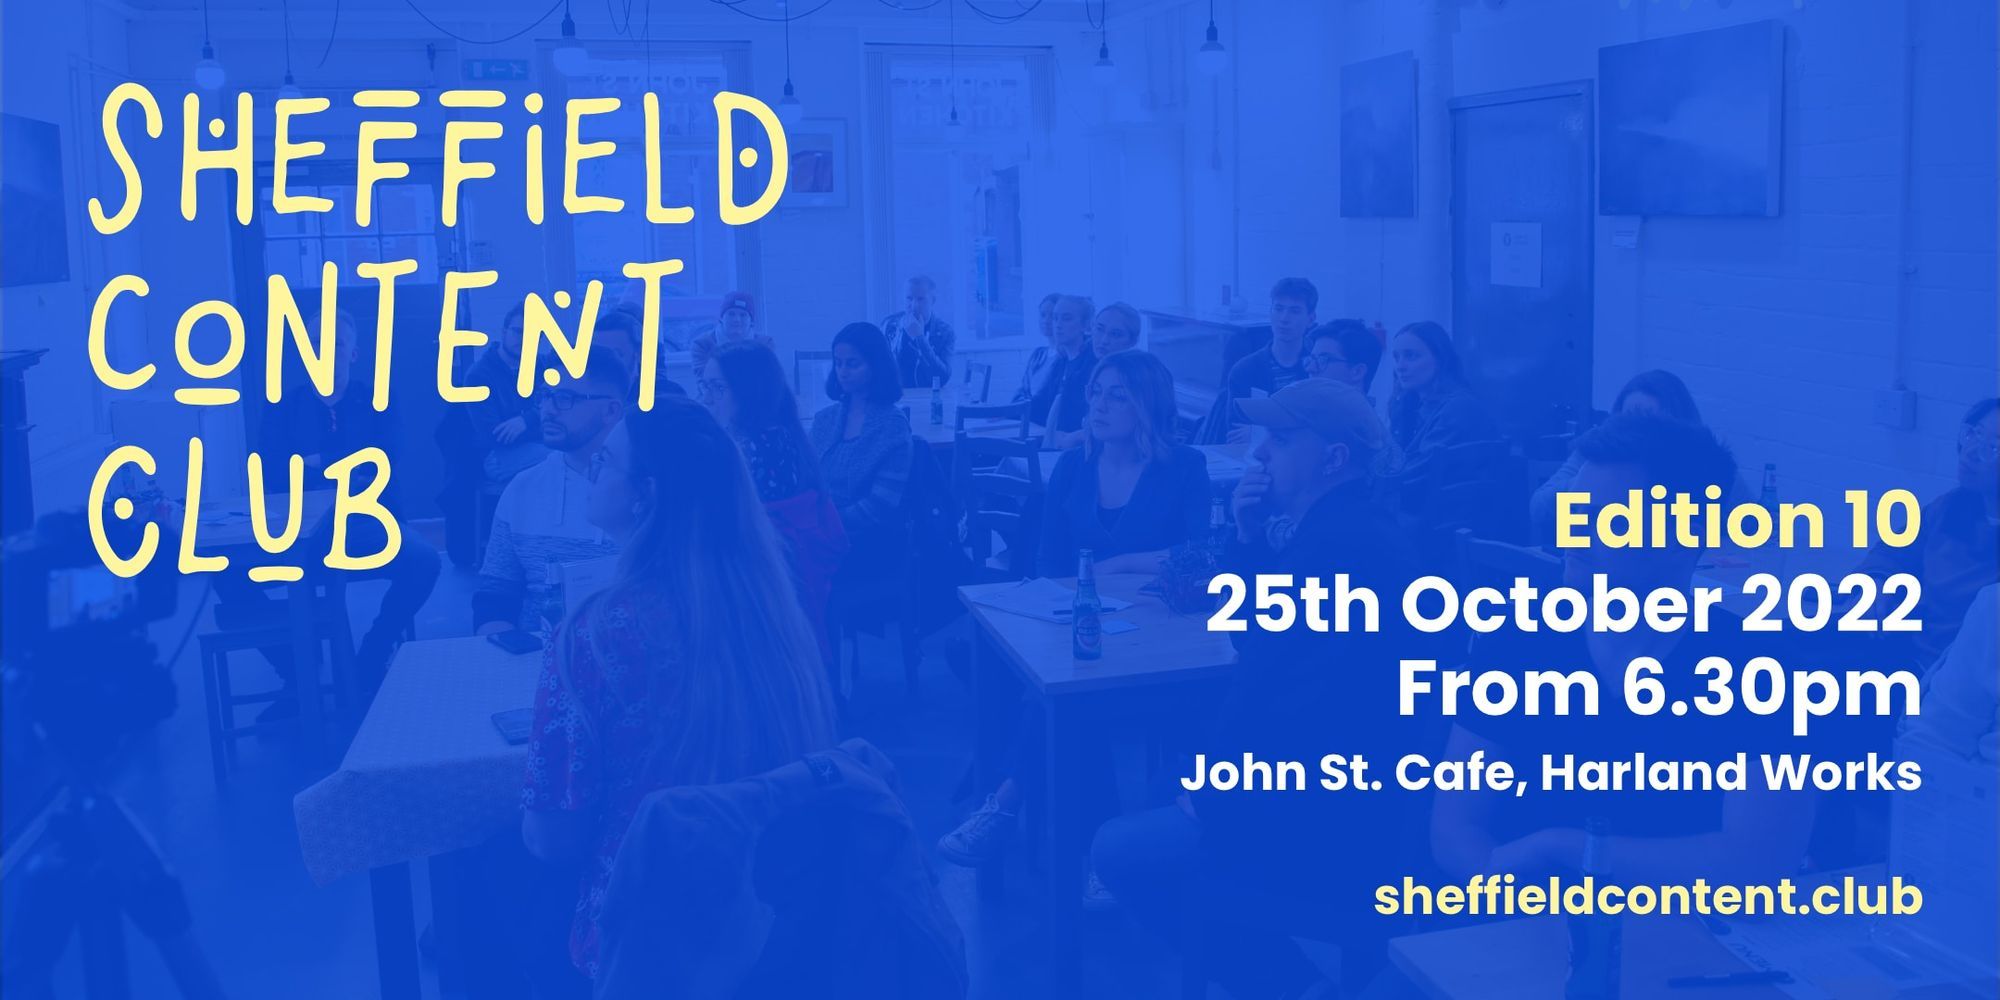 It's Sheffield Content Club on Tuesday...